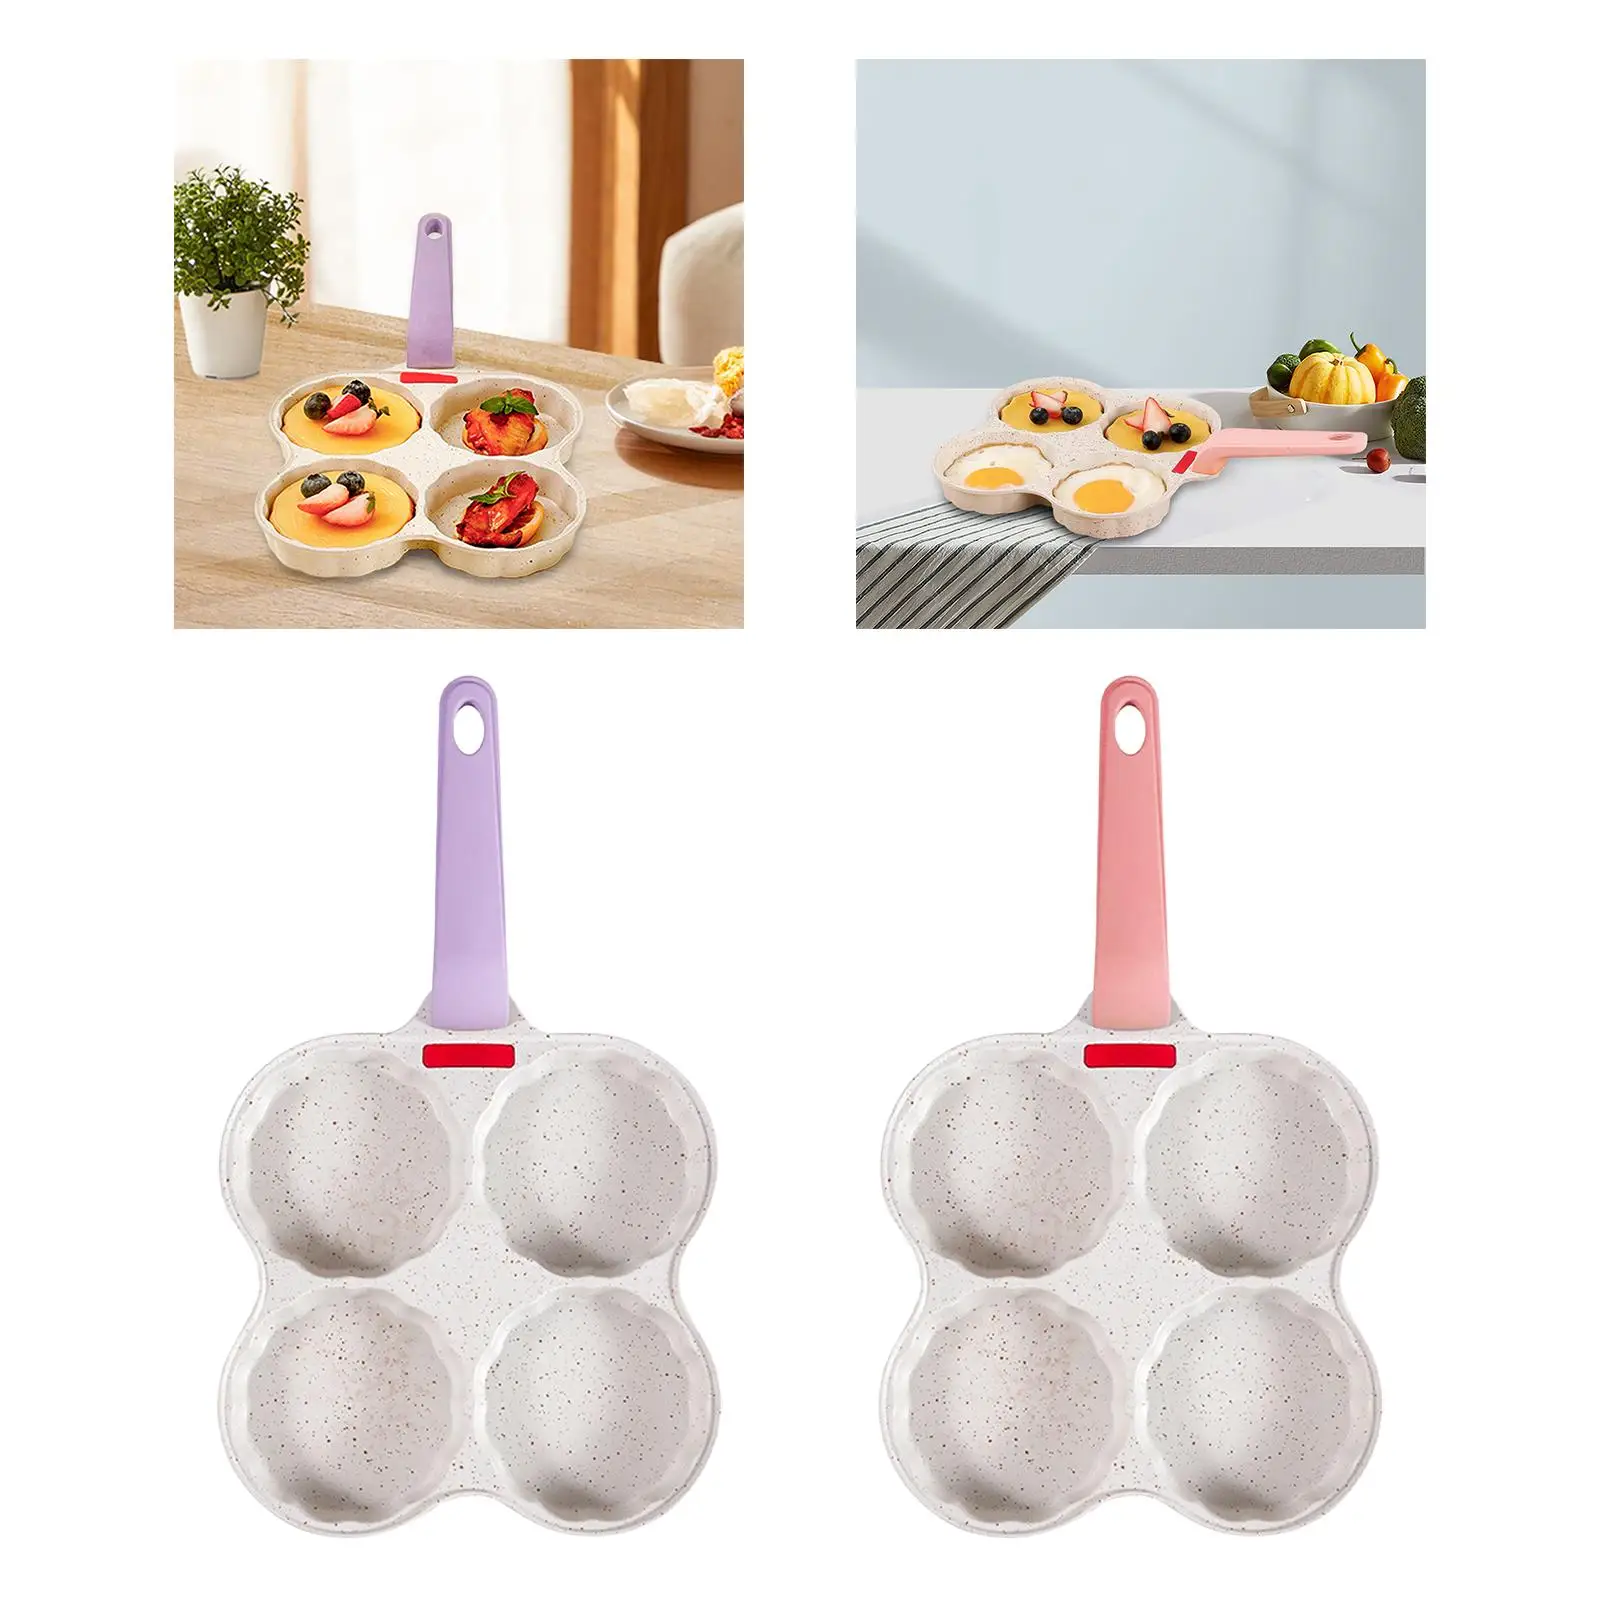 Egg Frying Pan Cooking Ham Muffins 4 Cups with Handle Crepe Pan Egg Skillet Breakfast Frying Pan Gas Stove Kitchen Supplies